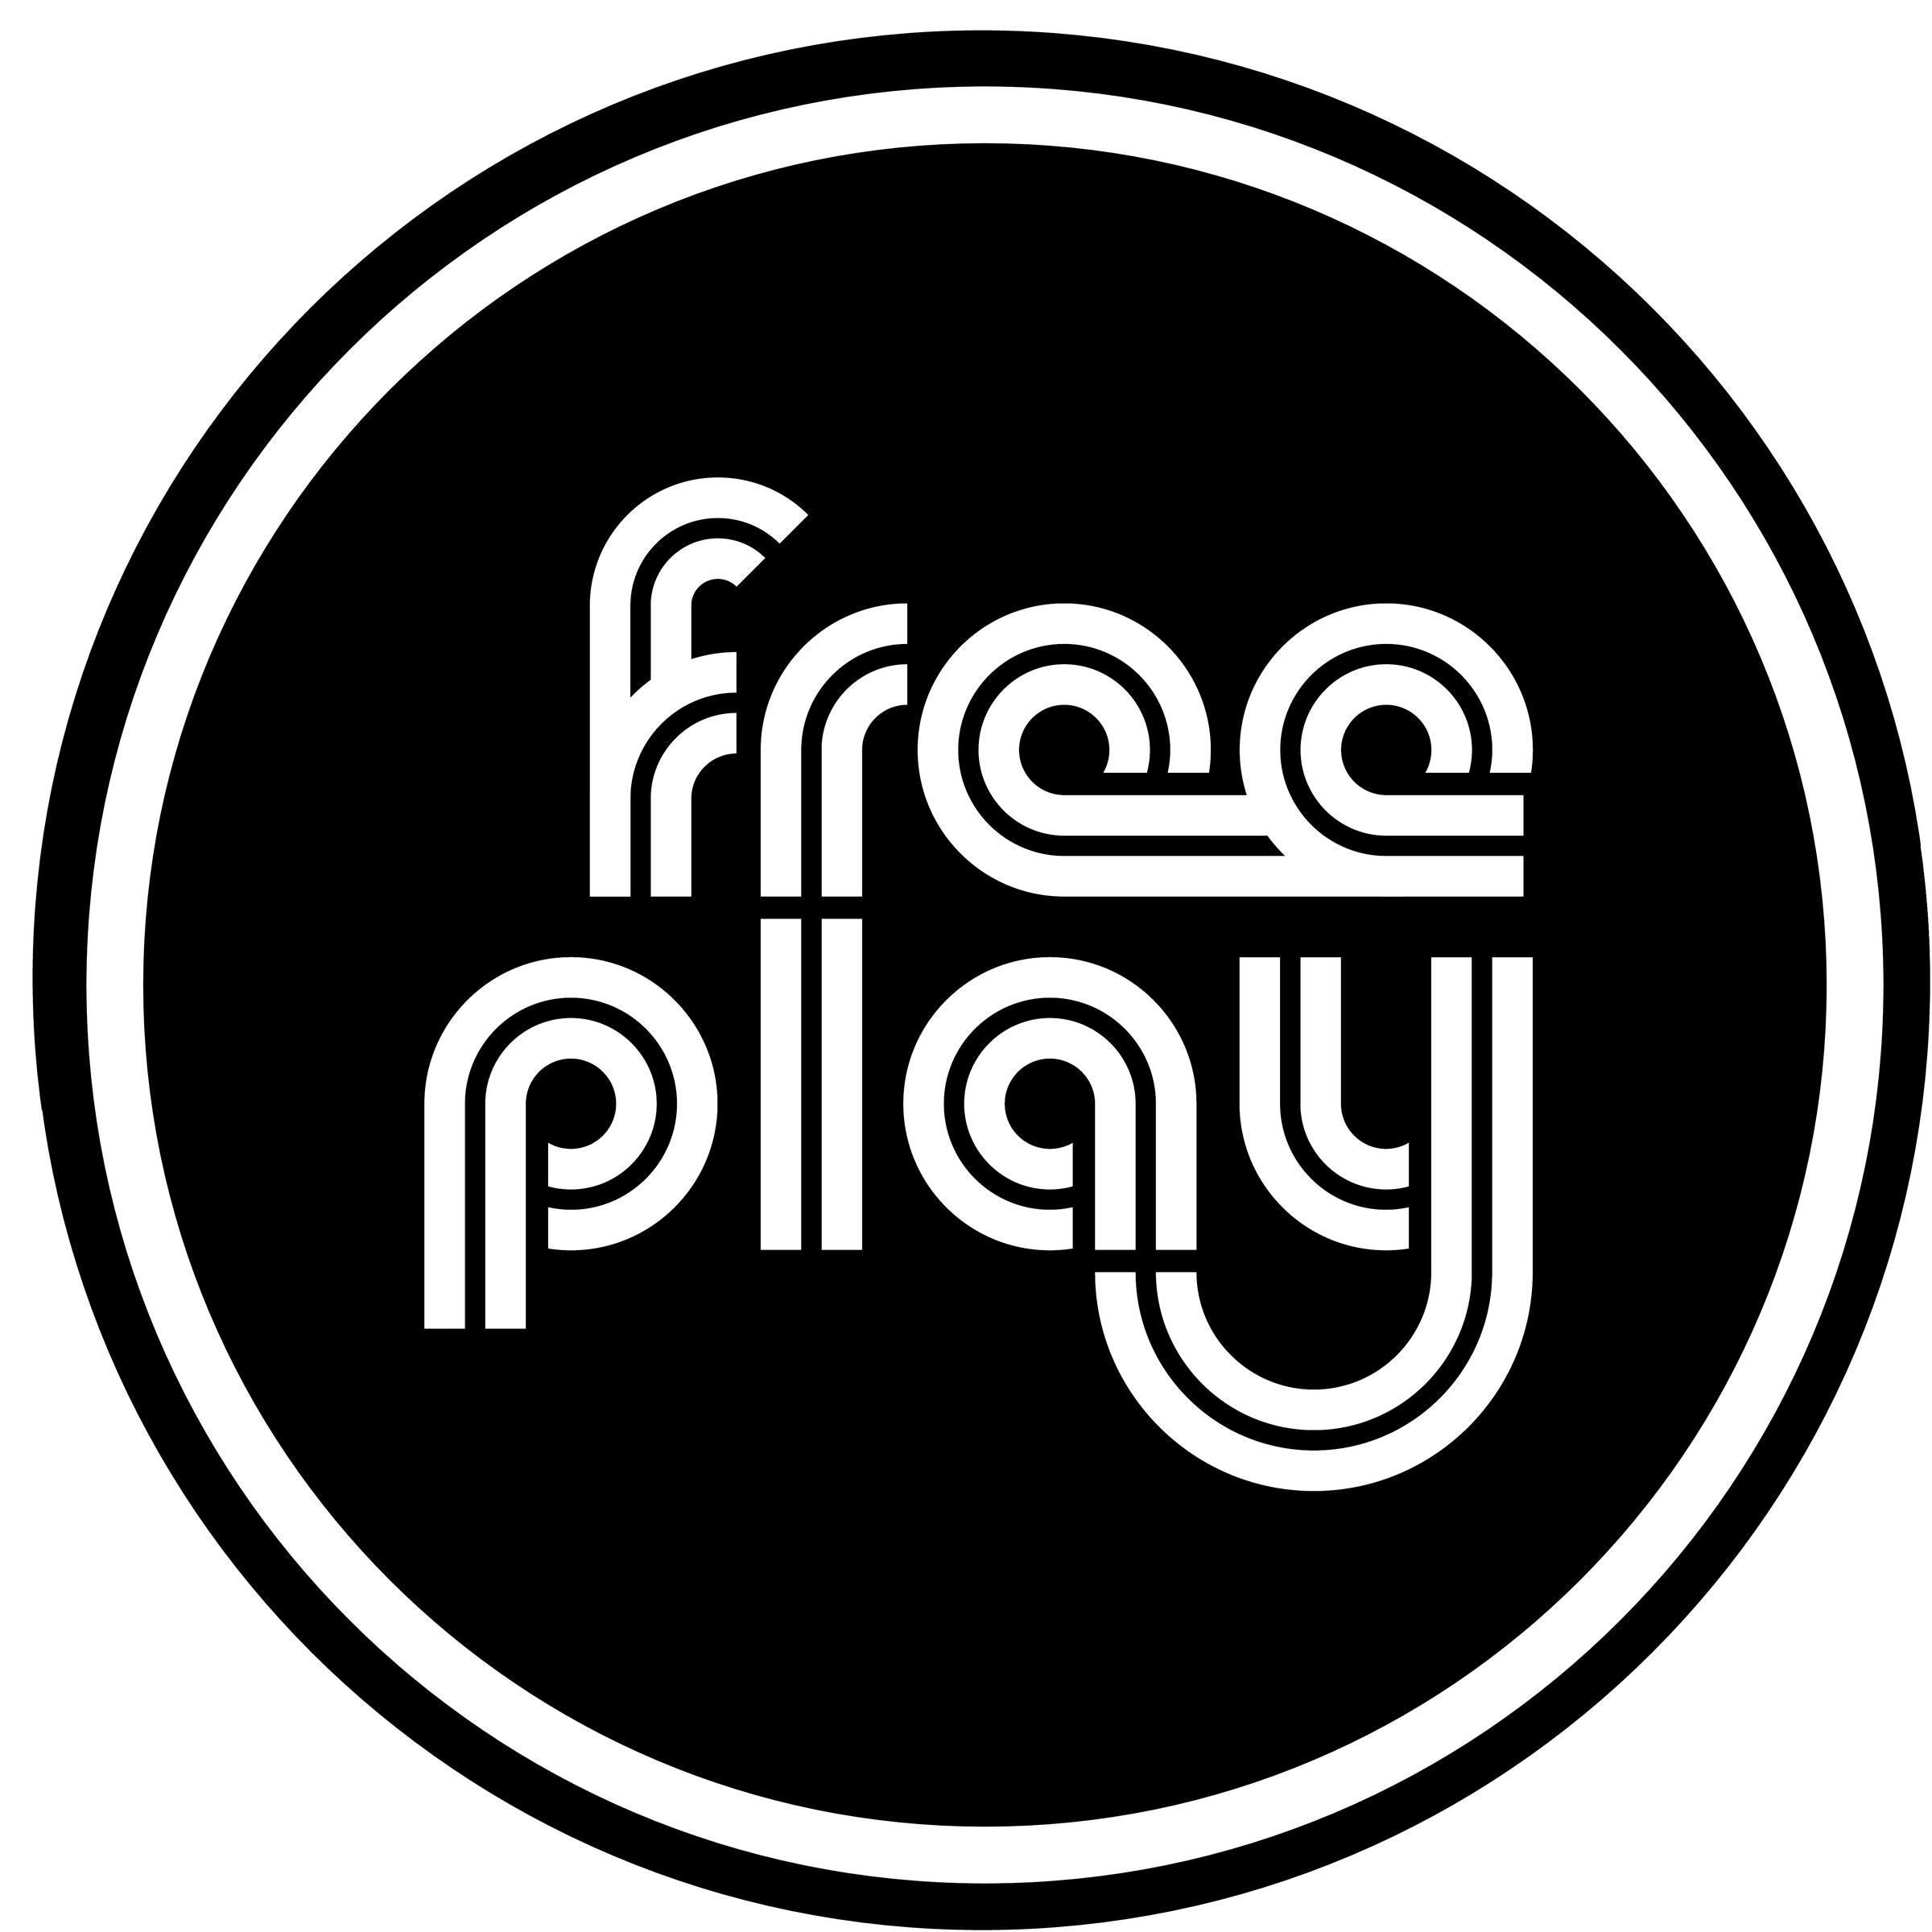 Free Play Sticker Pack Add-On